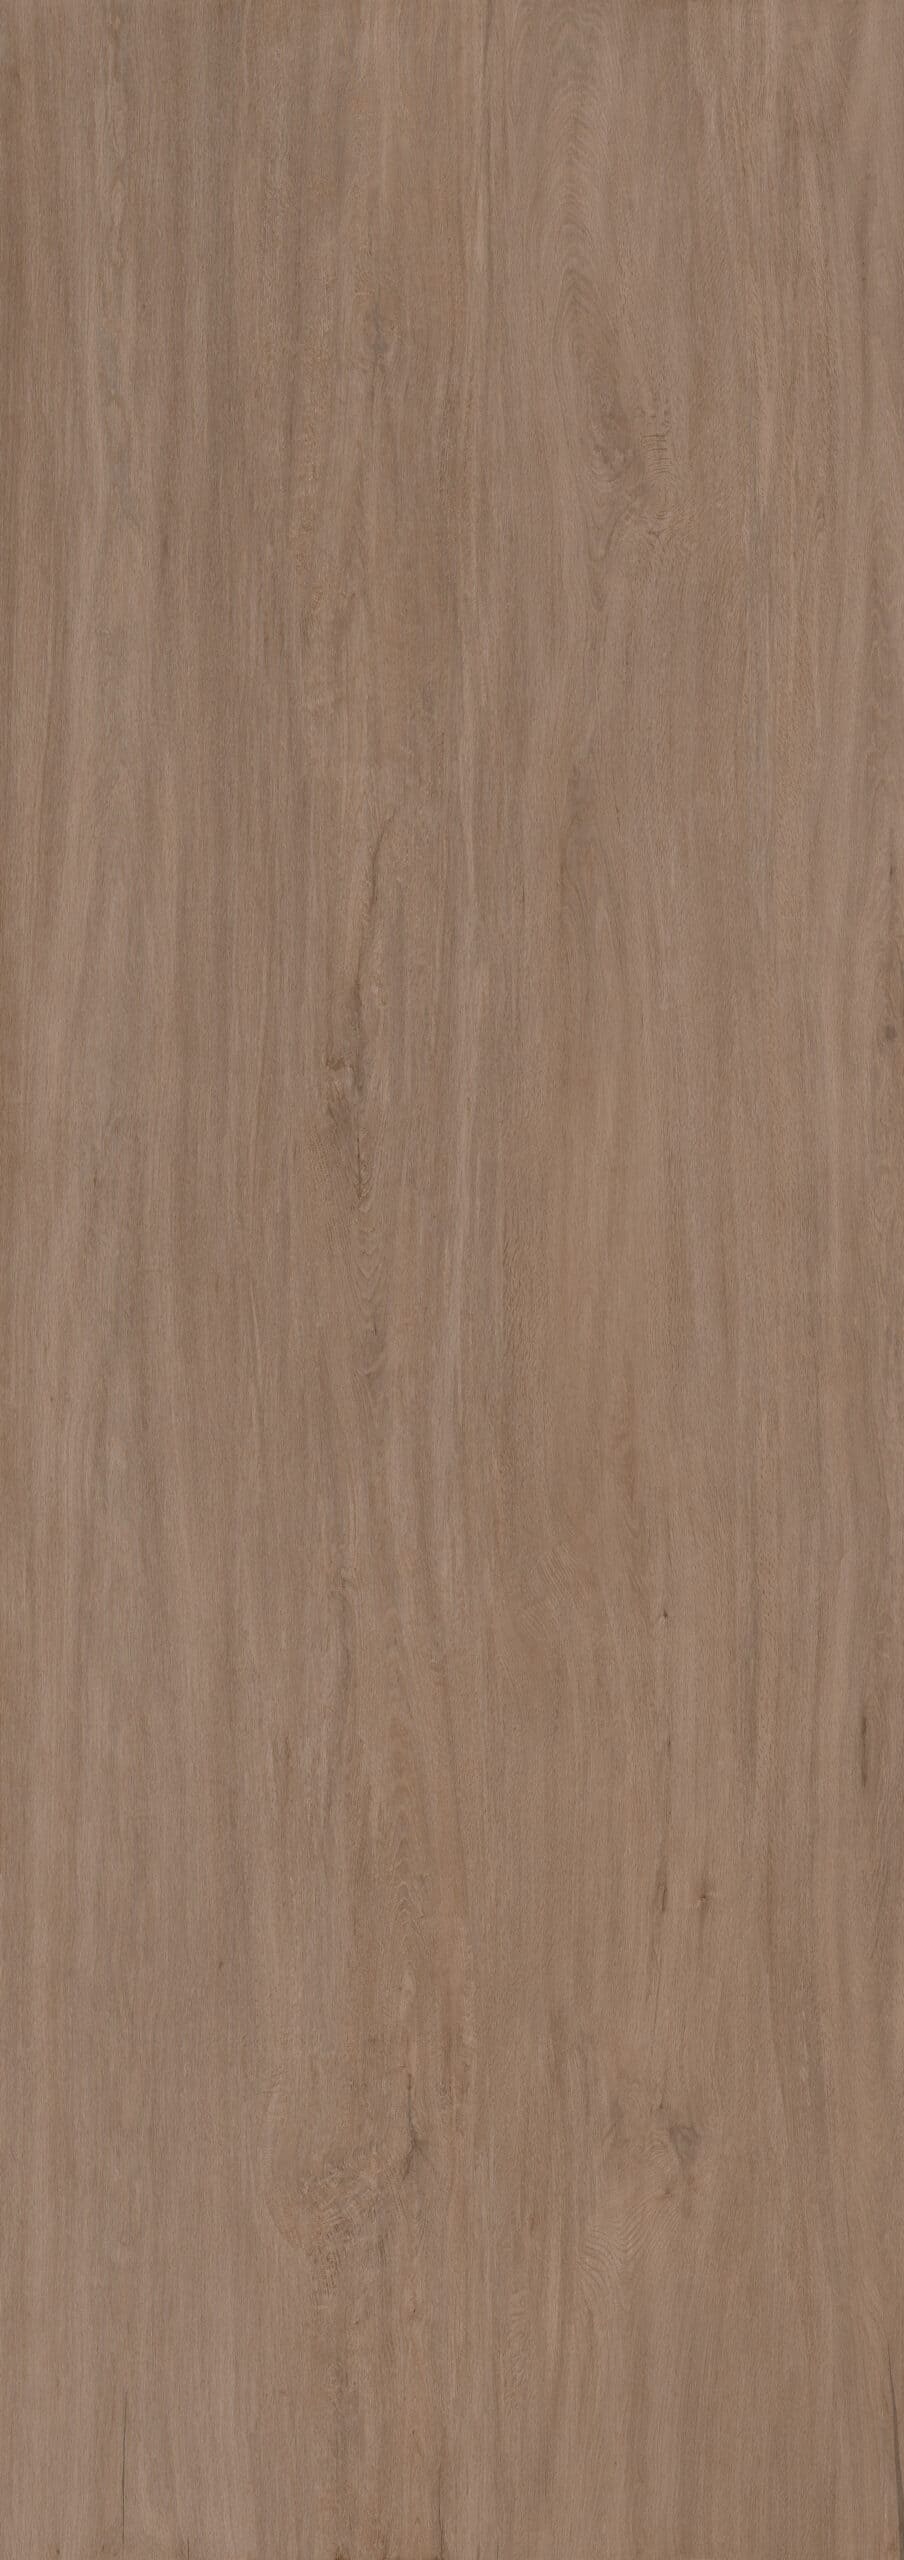 Wood Rovere F2 scaled 1 1